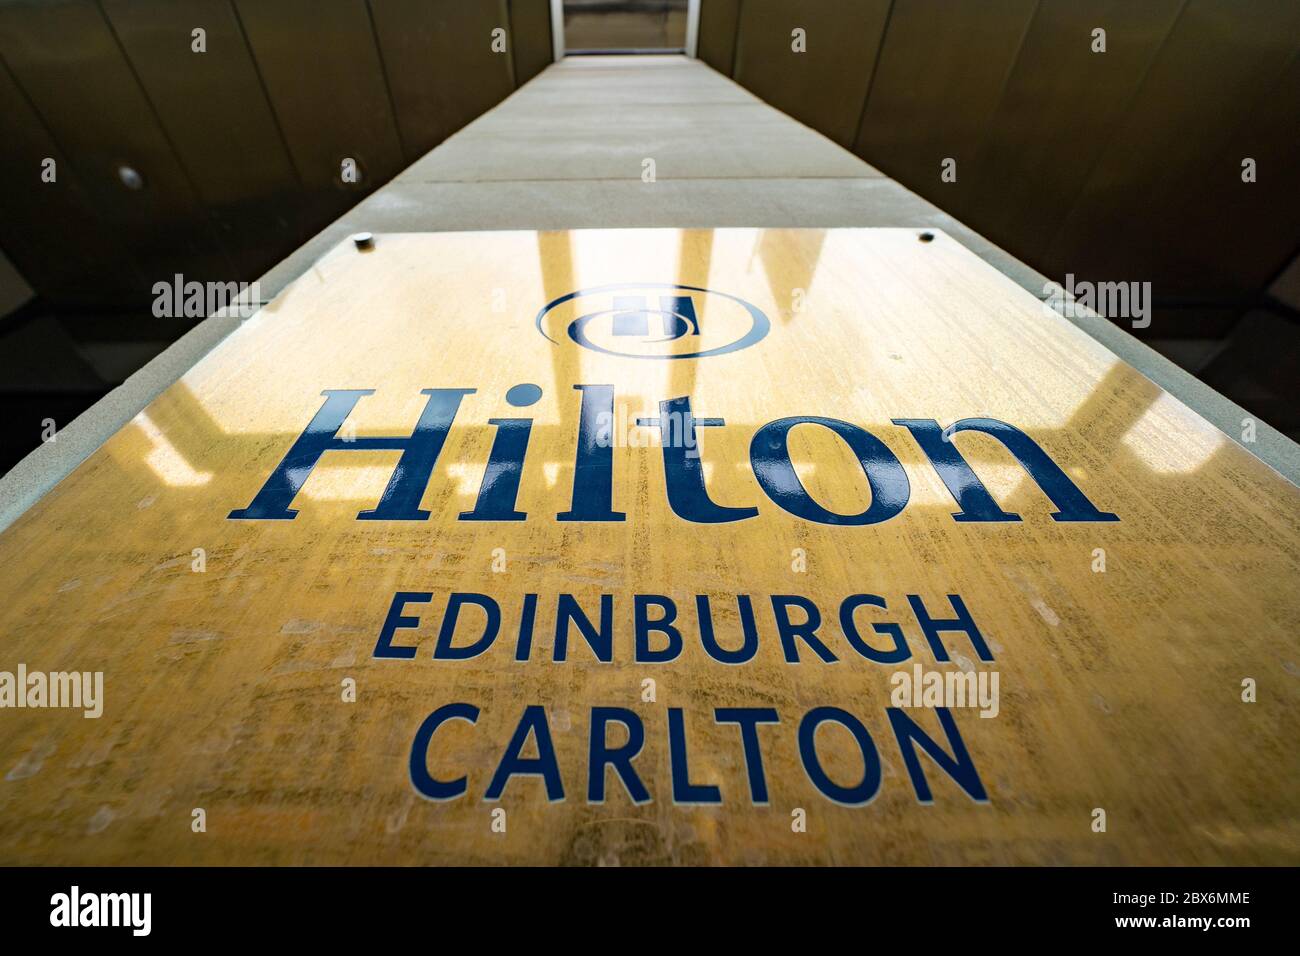 Hilton Carlton Hotel in Edinburgh where possible first cases of coronavirus in Scotland were detected at a Nike conference held there, Scotland, UK Stock Photo